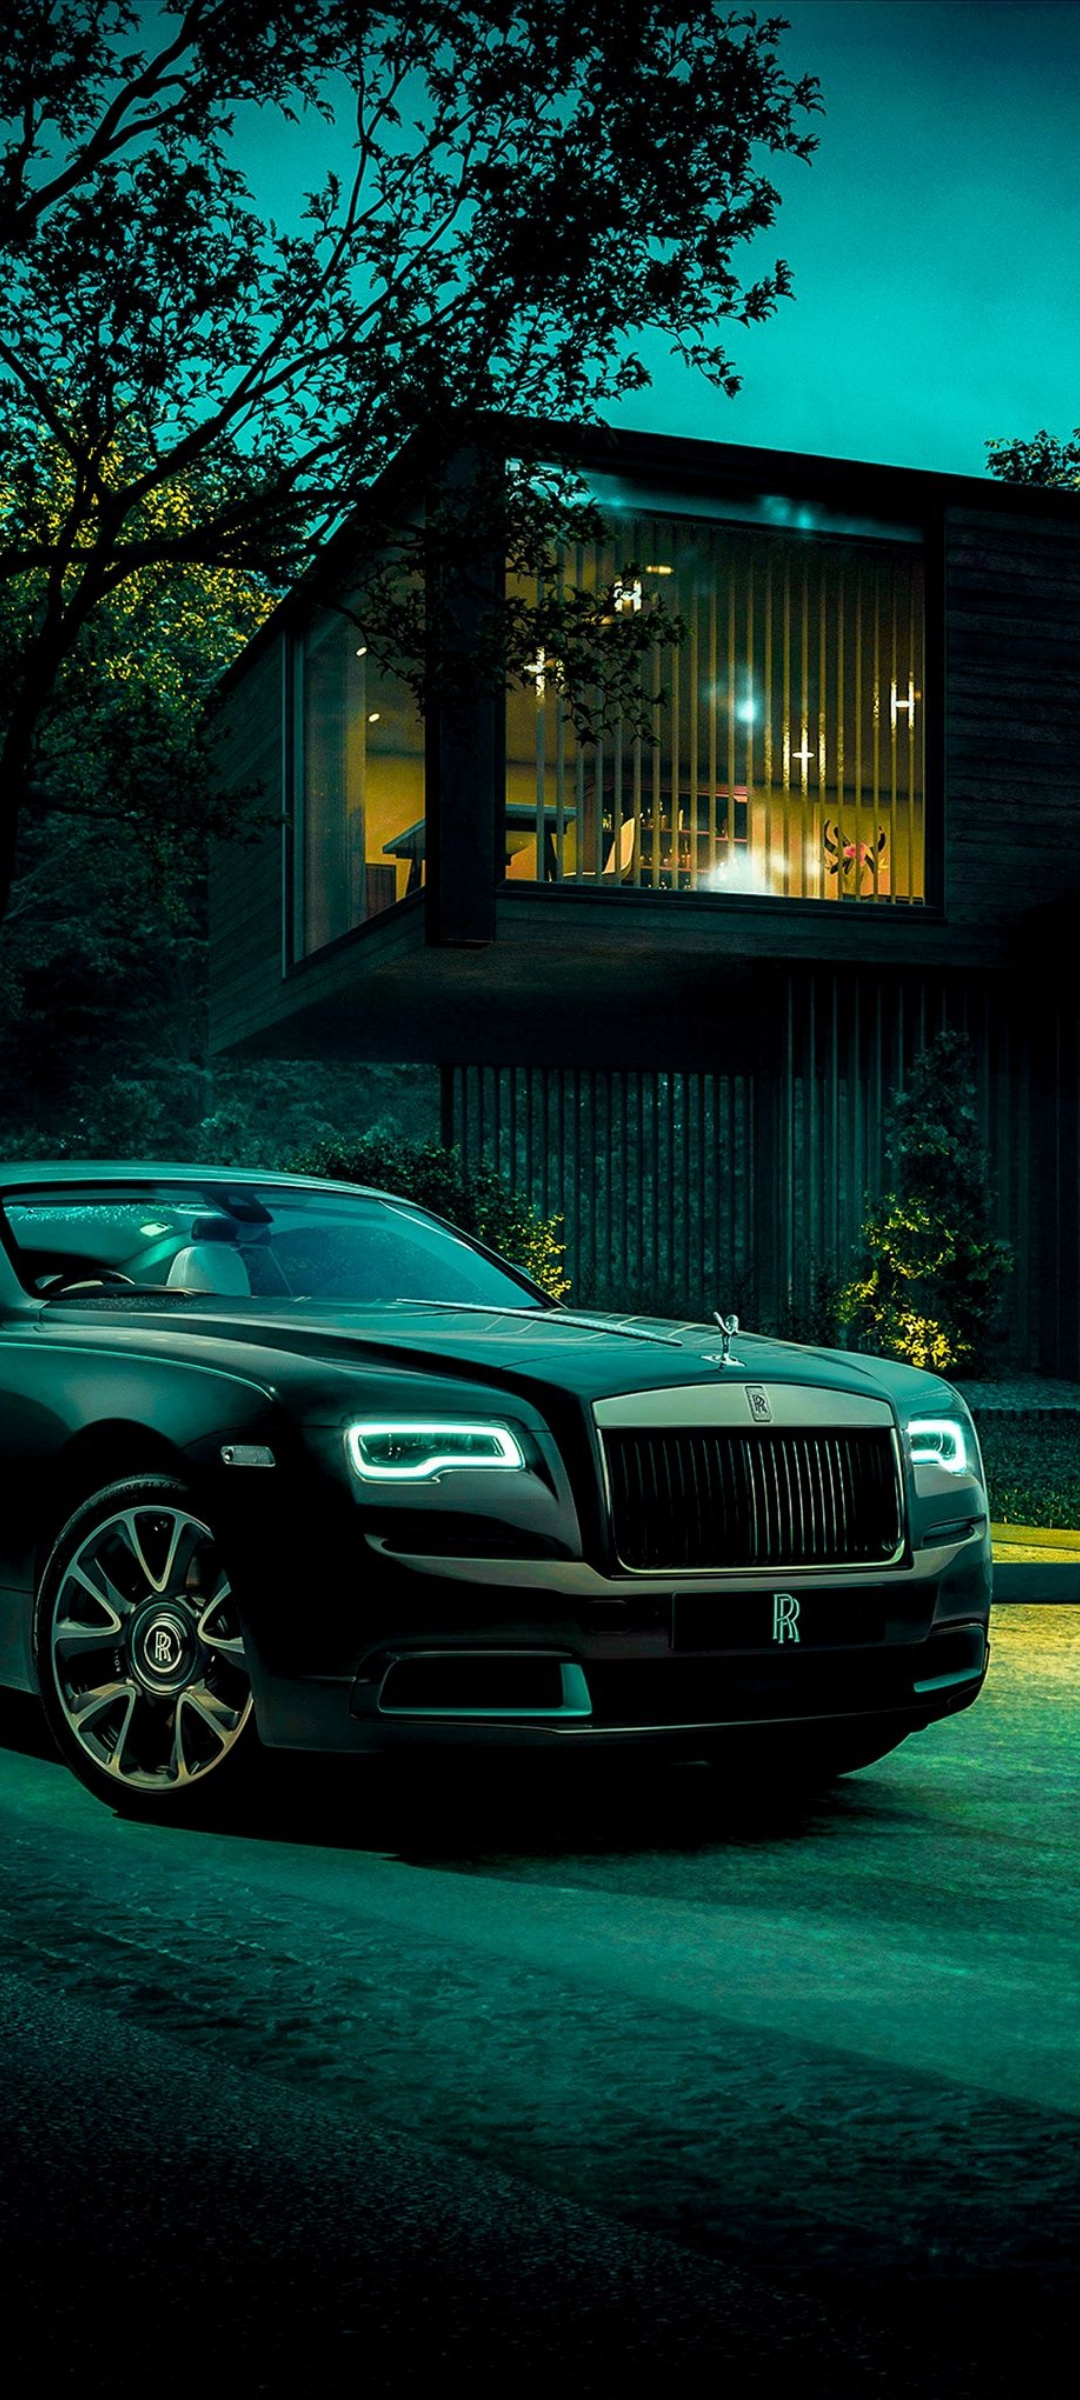 Worlds last V12 RollsRoyce in images Black Badge Wraith Black Arrow   Times of India